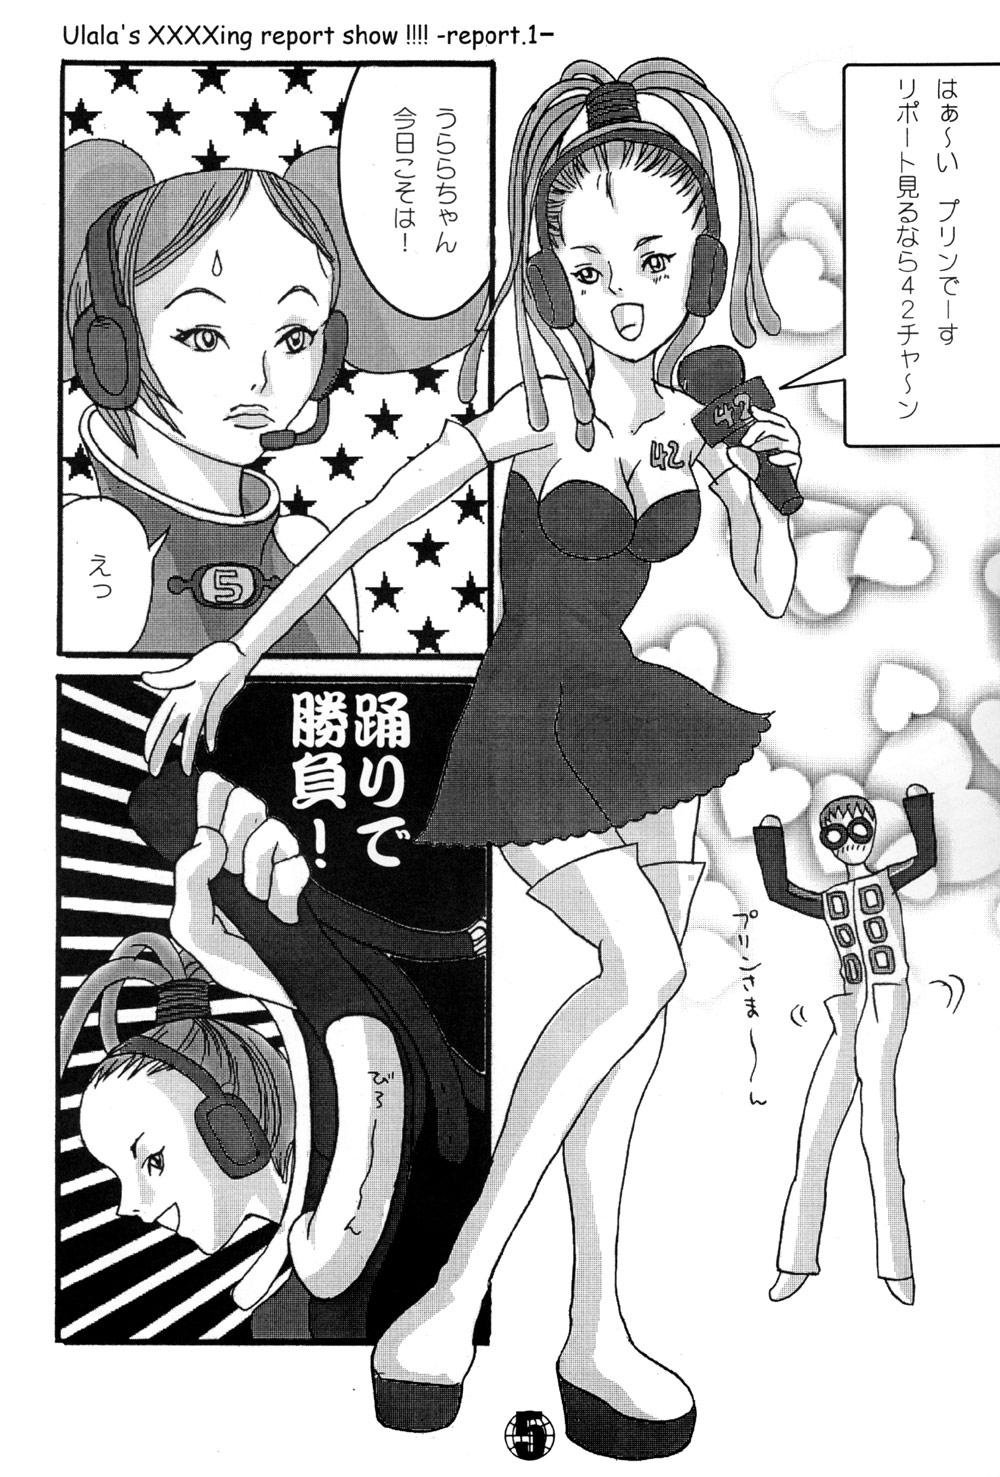 Cream Pie Ulala's XXXXing Report Show!!!! - Space channel 5 Rubdown - Page 5